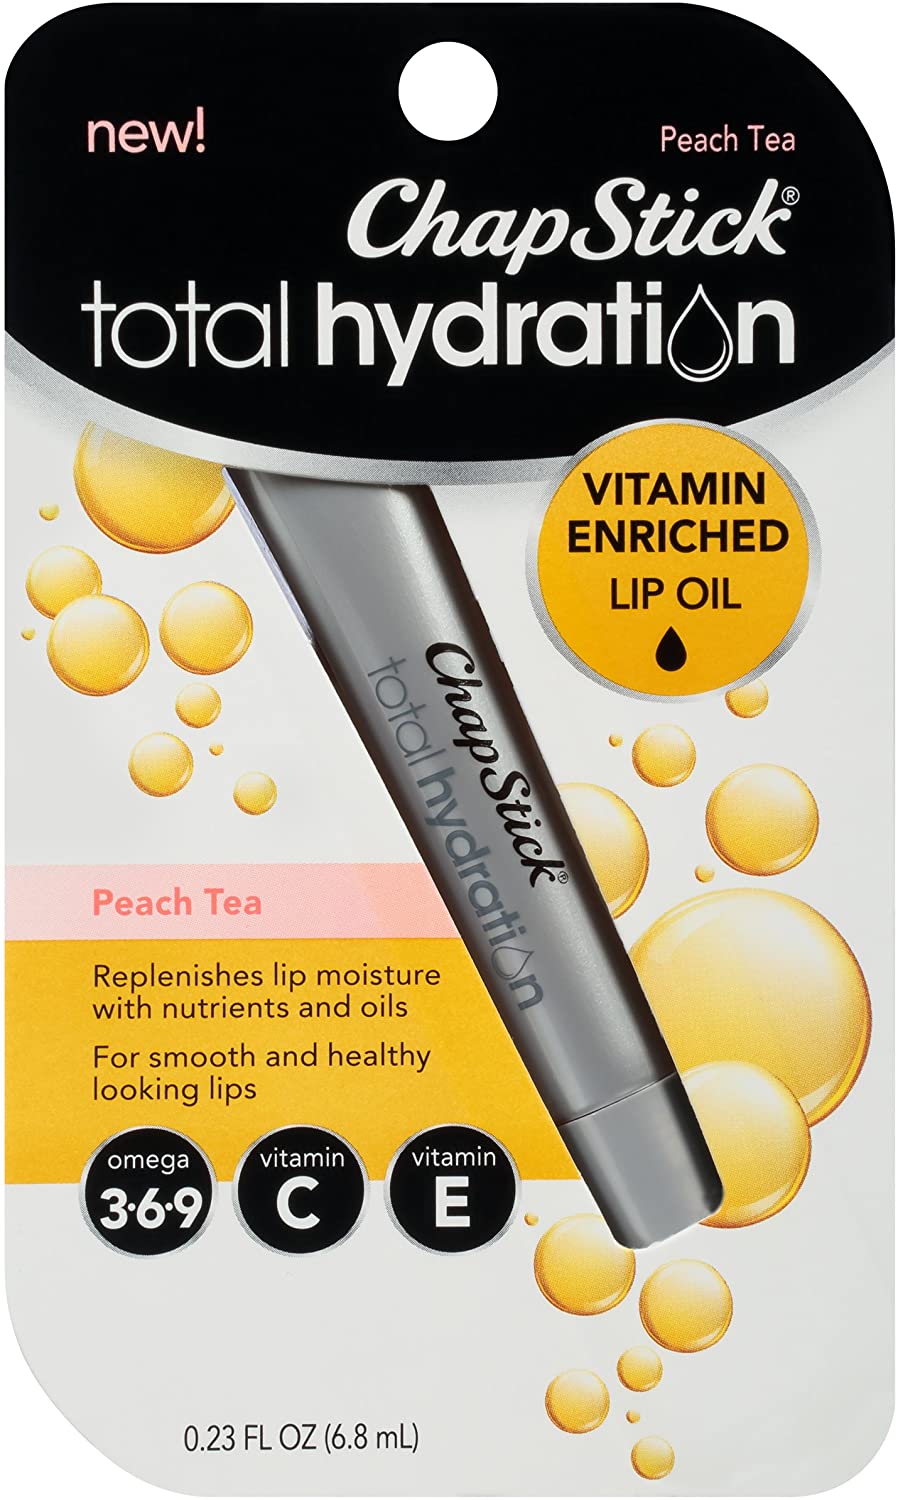 Chapstick Total Hydration Vitamin Enriched Lip Oil (Peach Tea Flavor, Non-Tinted) $1.65 w/ S&S + Free Shipping w/ Prime or $25+